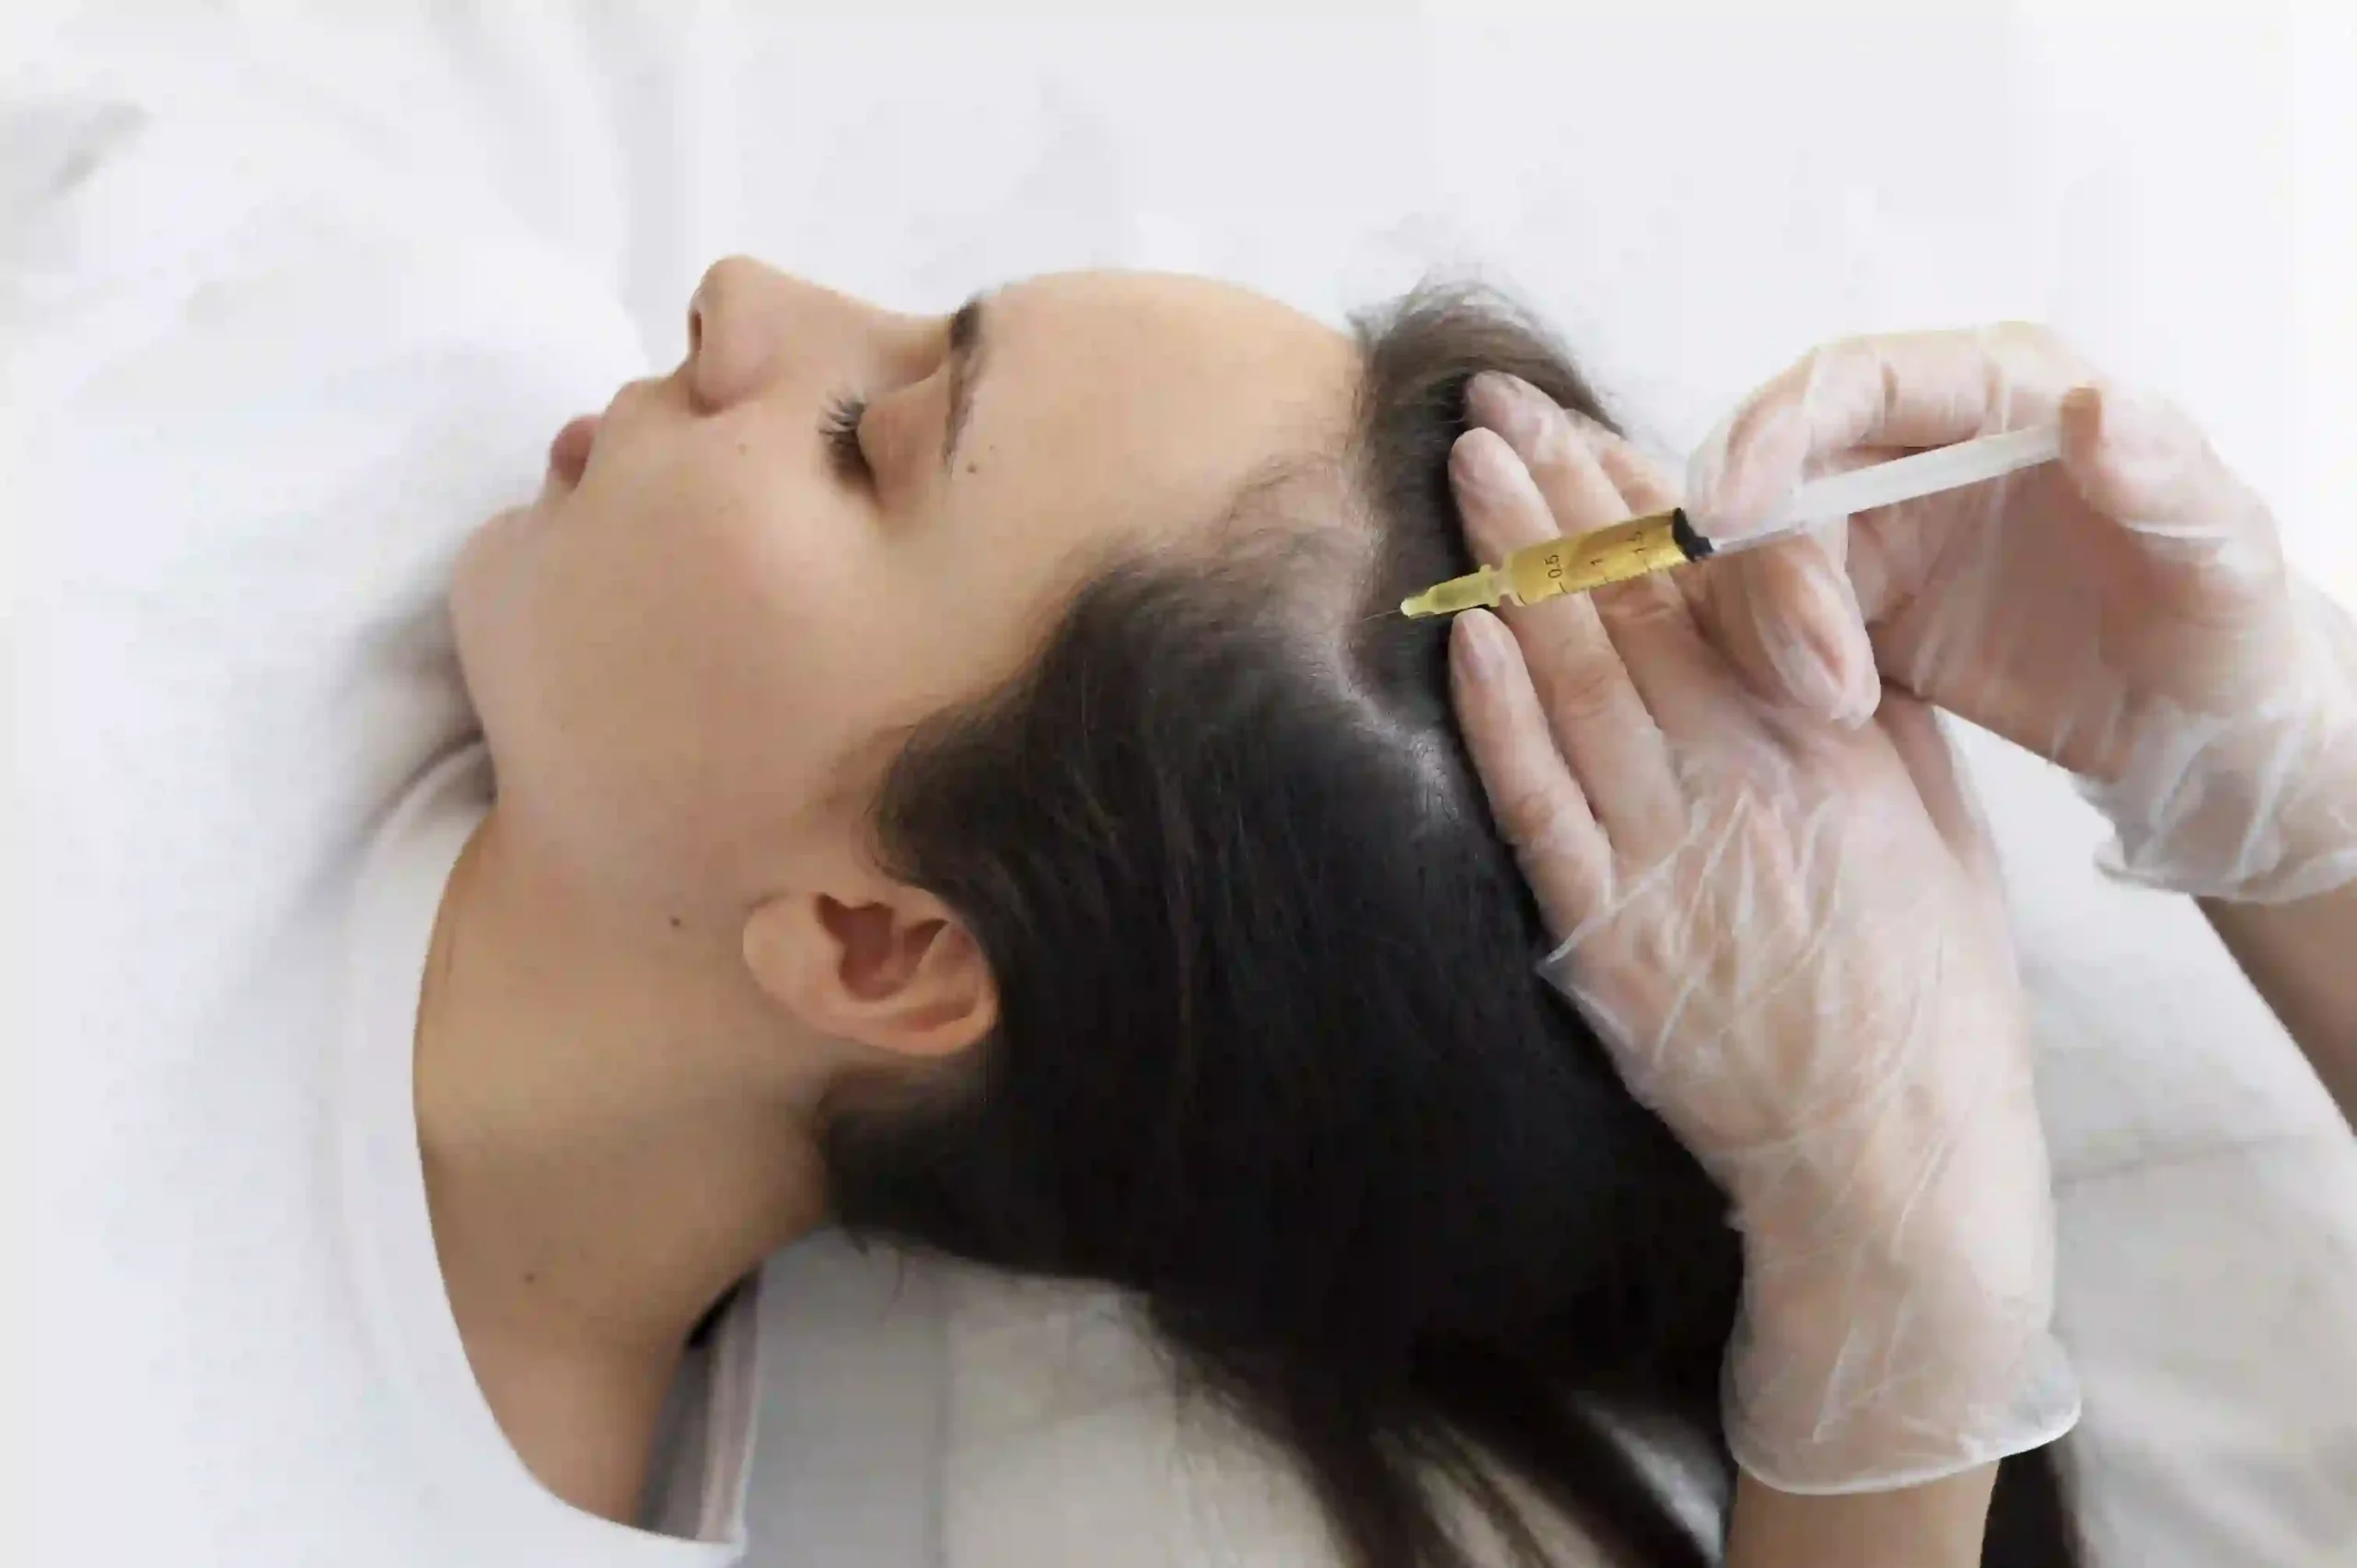 Mesotherapy treatment for skin rejuvenation and body contouring at DermaVue